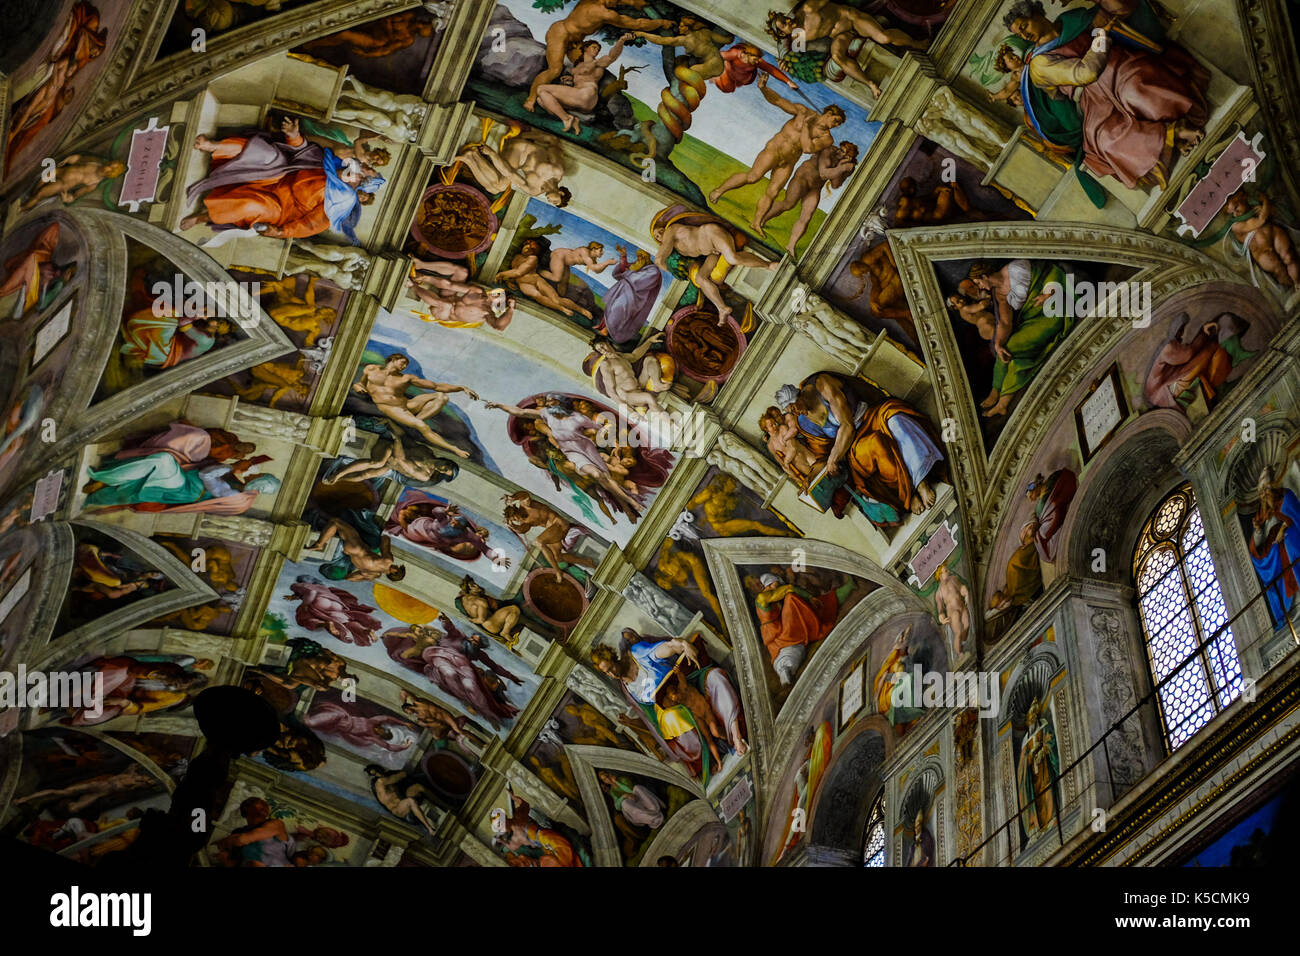 interior views of the Sistine Chapel at Vatican City in Rome, Italy on July 5, 2016. Stock Photo